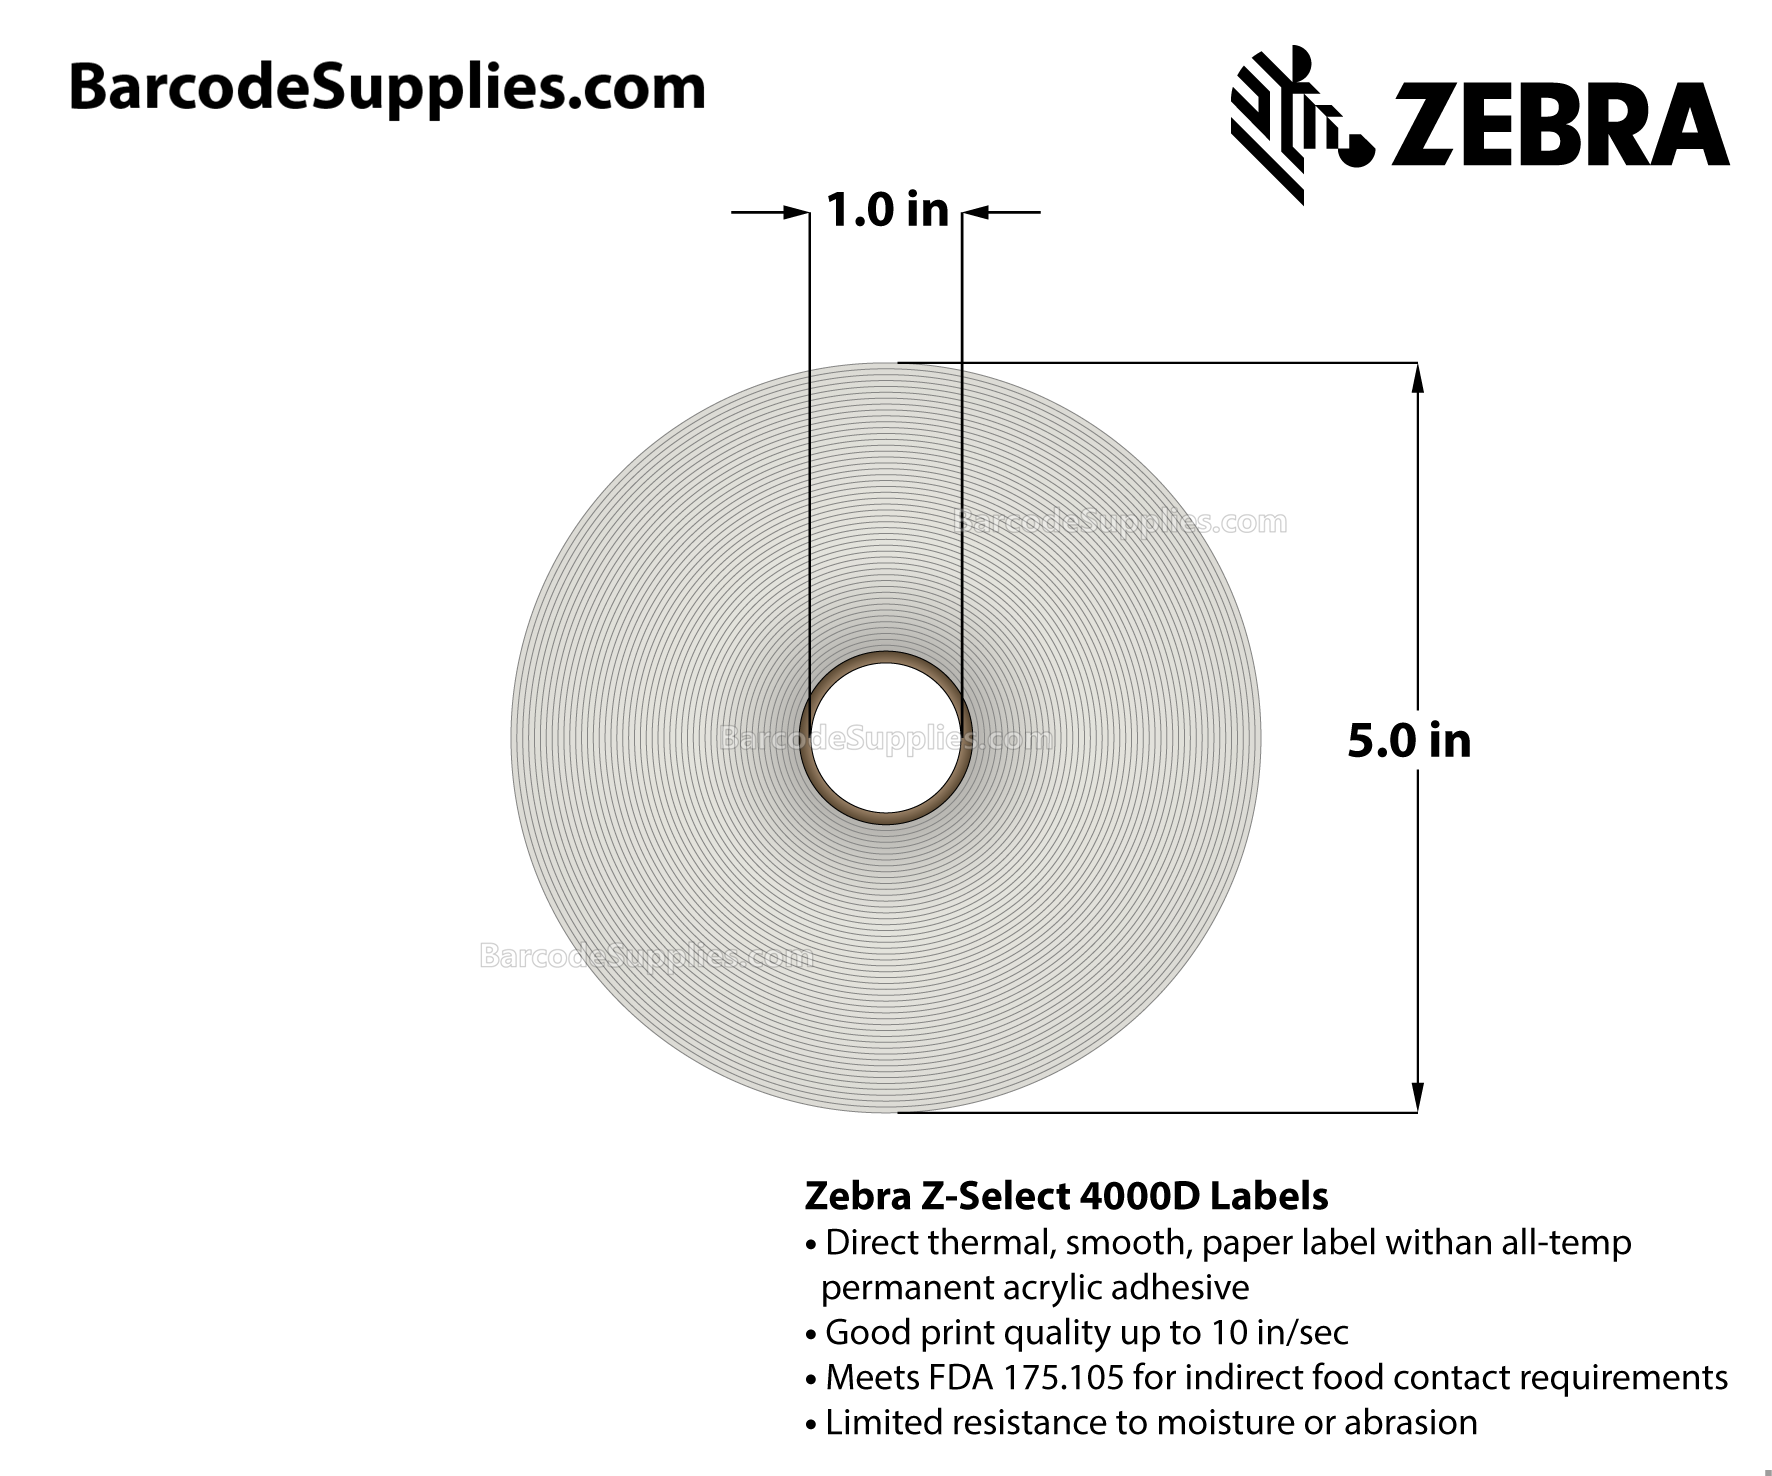 1 x 3 Direct Thermal White Z-Select 4000D Labels With All-Temp Adhesive - Perforated - 840 Labels Per Roll - Carton Of 6 Rolls - 5040 Labels Total - MPN: 10010036